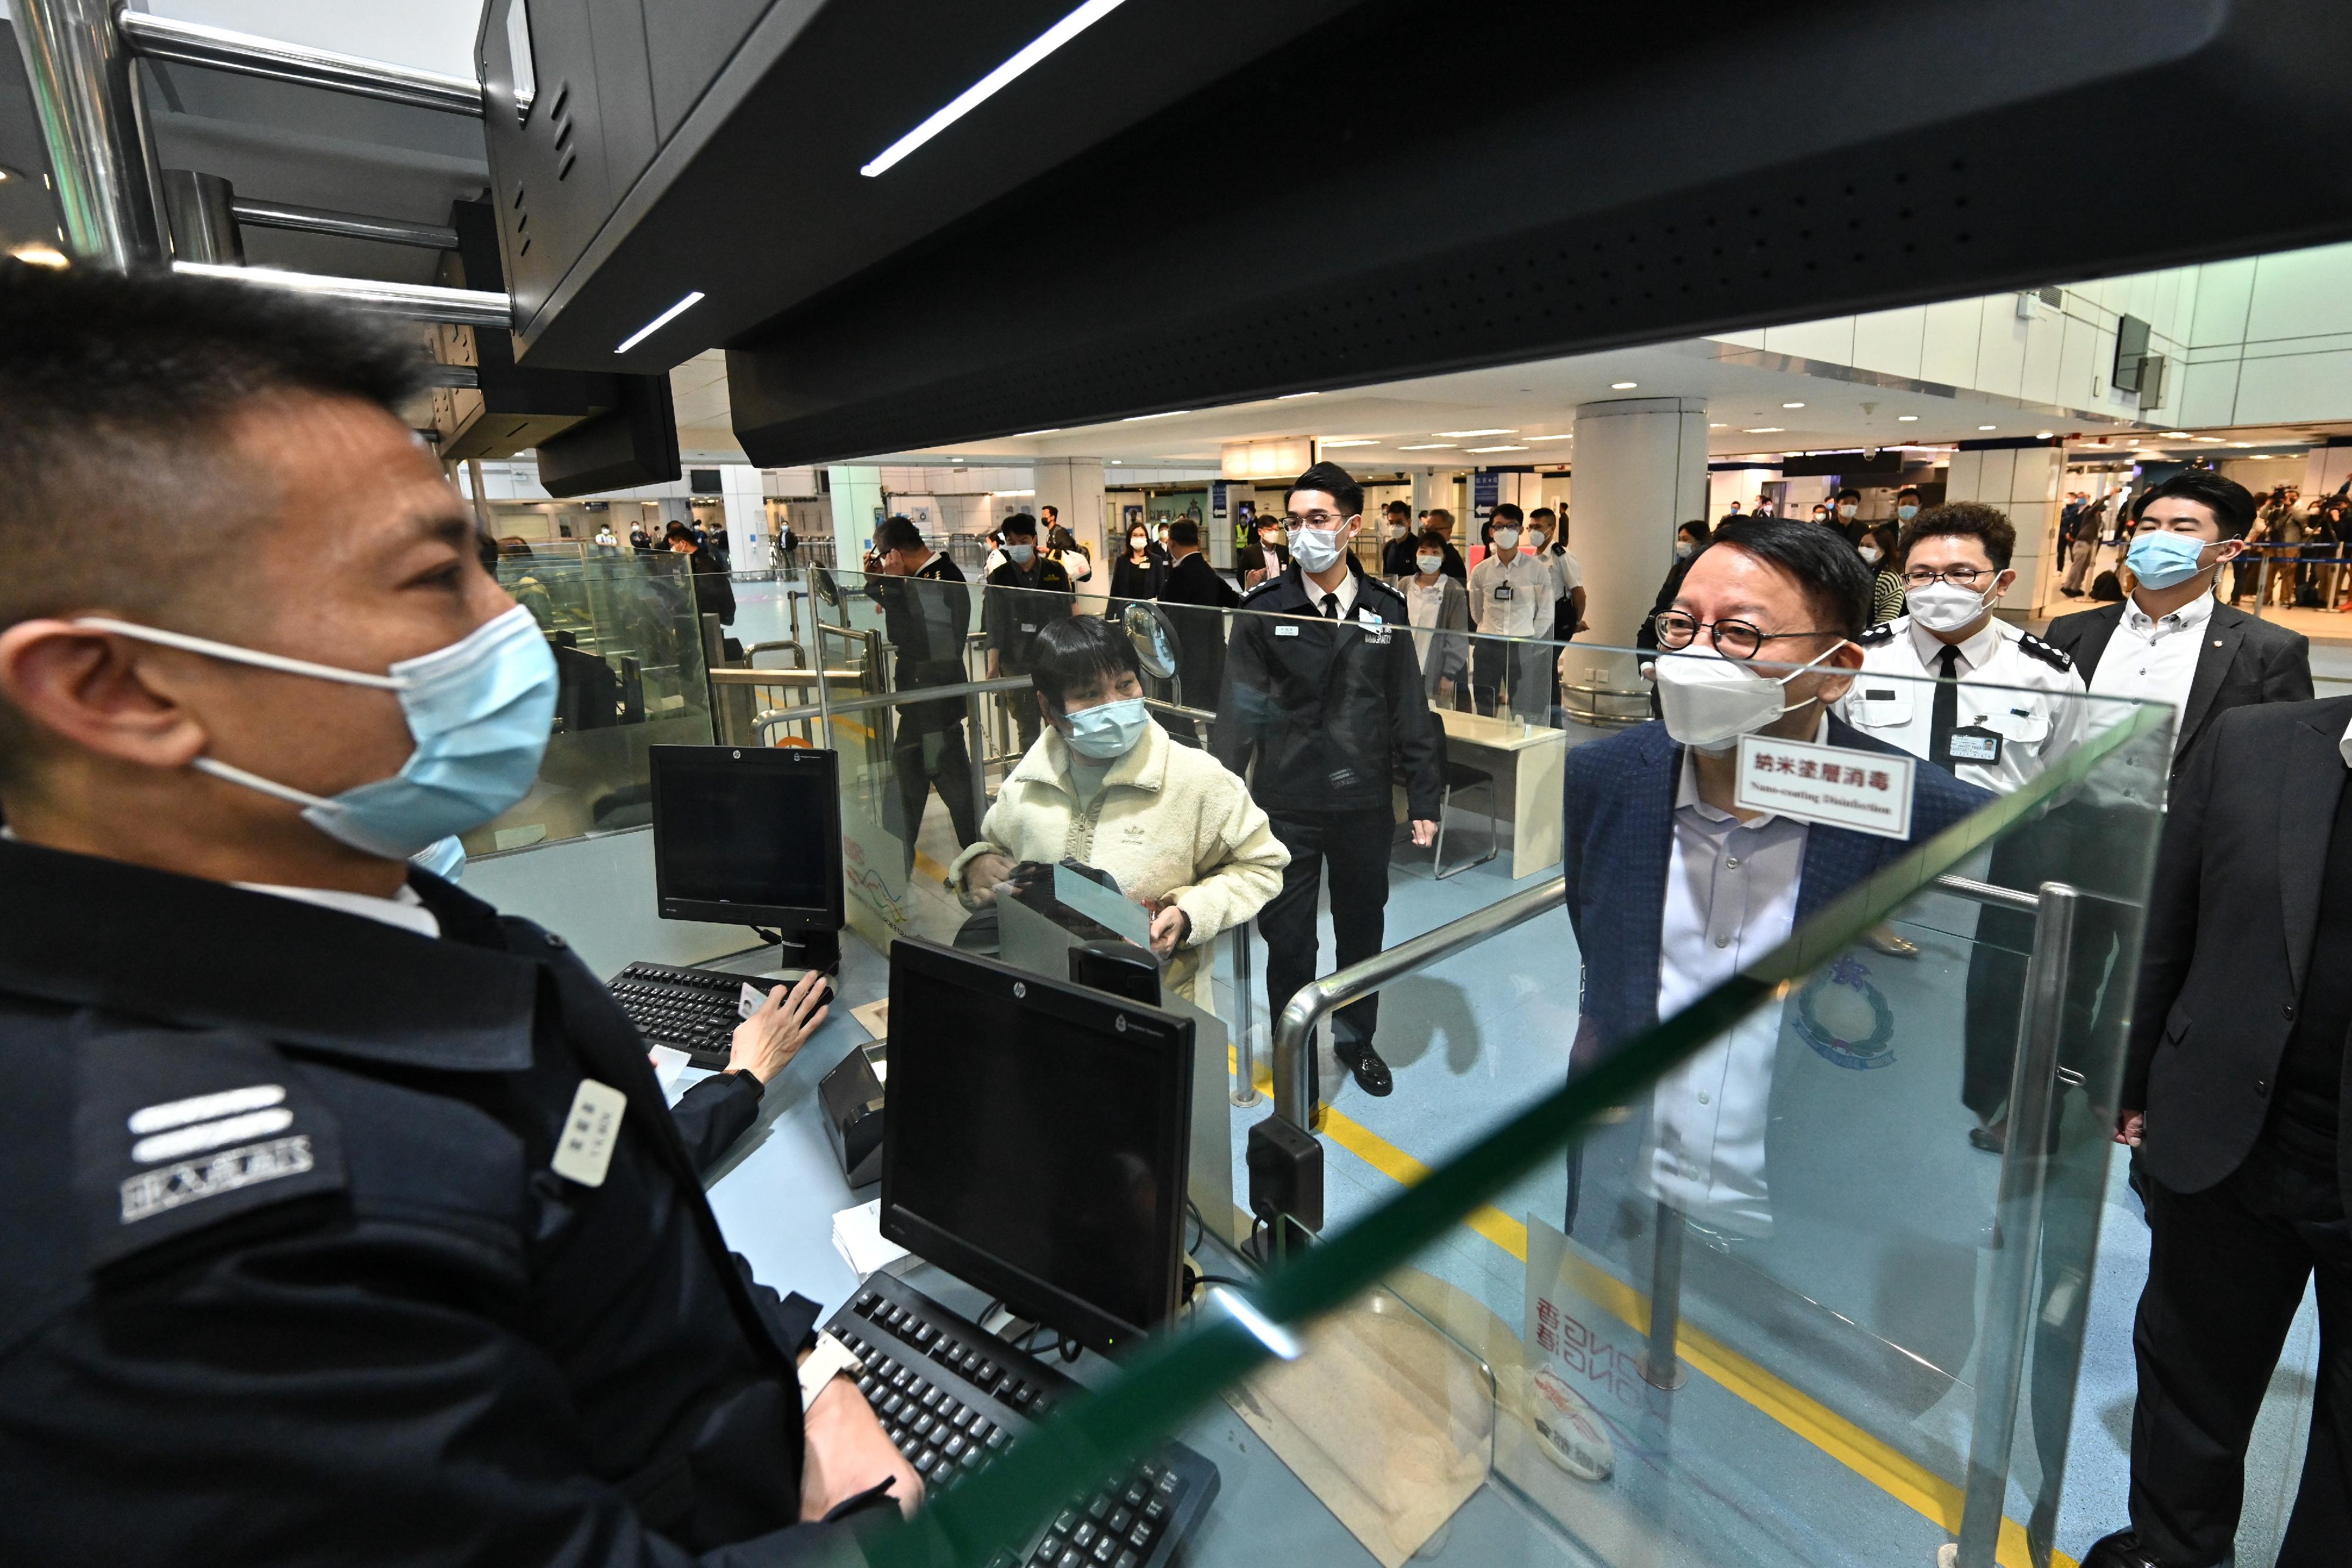 The Acting Chief Executive, Mr Chan Kwok-ki, this morning (February 6) inspected the Lo Wu Control Point to learn about the situation on the first day of full resumption of normal travel between Hong Kong and the Mainland.  Photo shows Mr Chan (right) chatting with a frontline officer of the Immigration Department on the immigration clearance services.